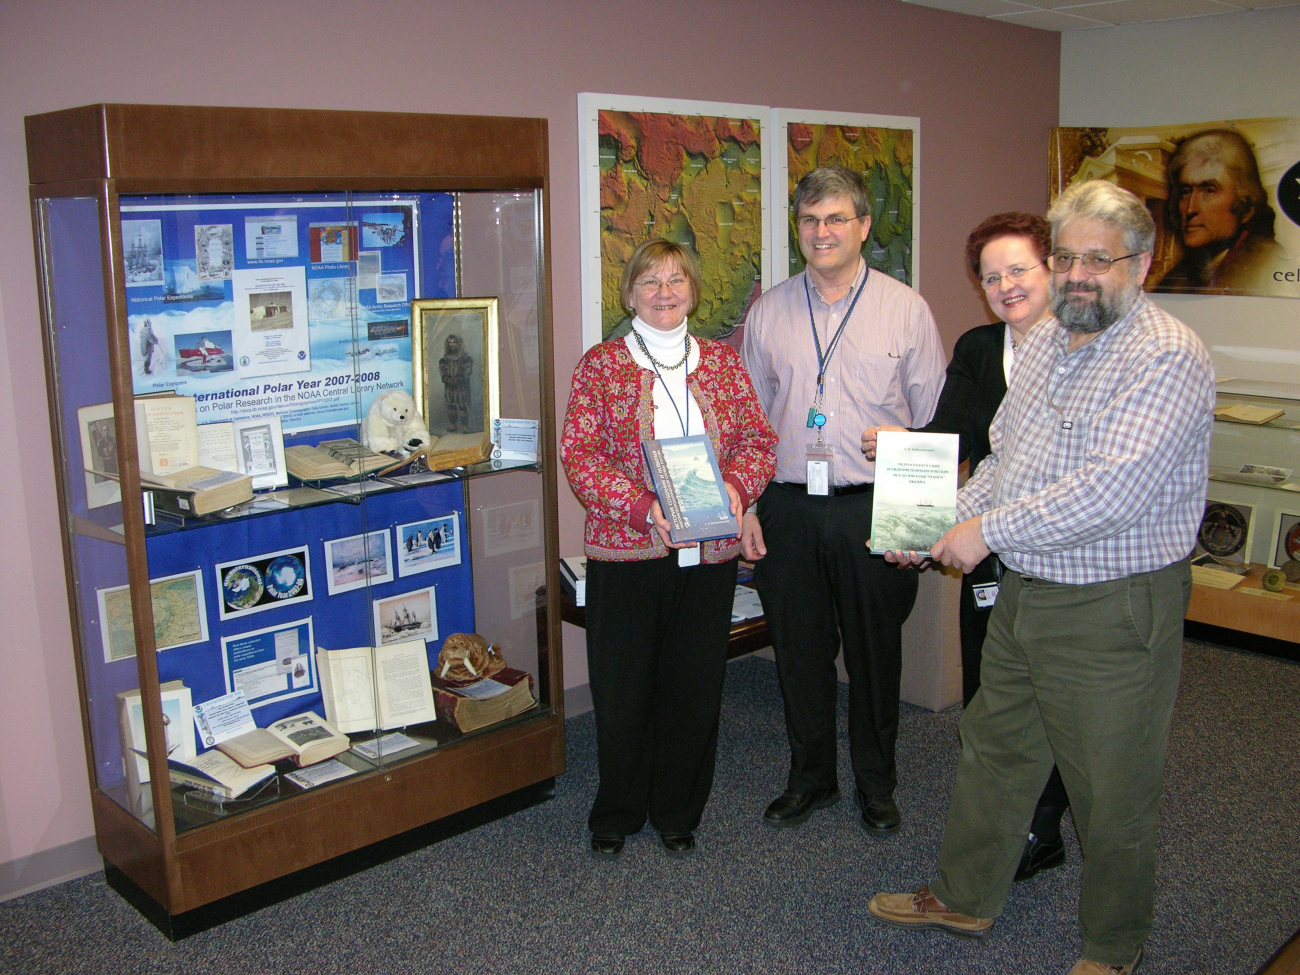 Janice Beattie, Director of NOAA Central Library, Albert Theberge and AnnaFiolek of NOAA Central Library, and Dr